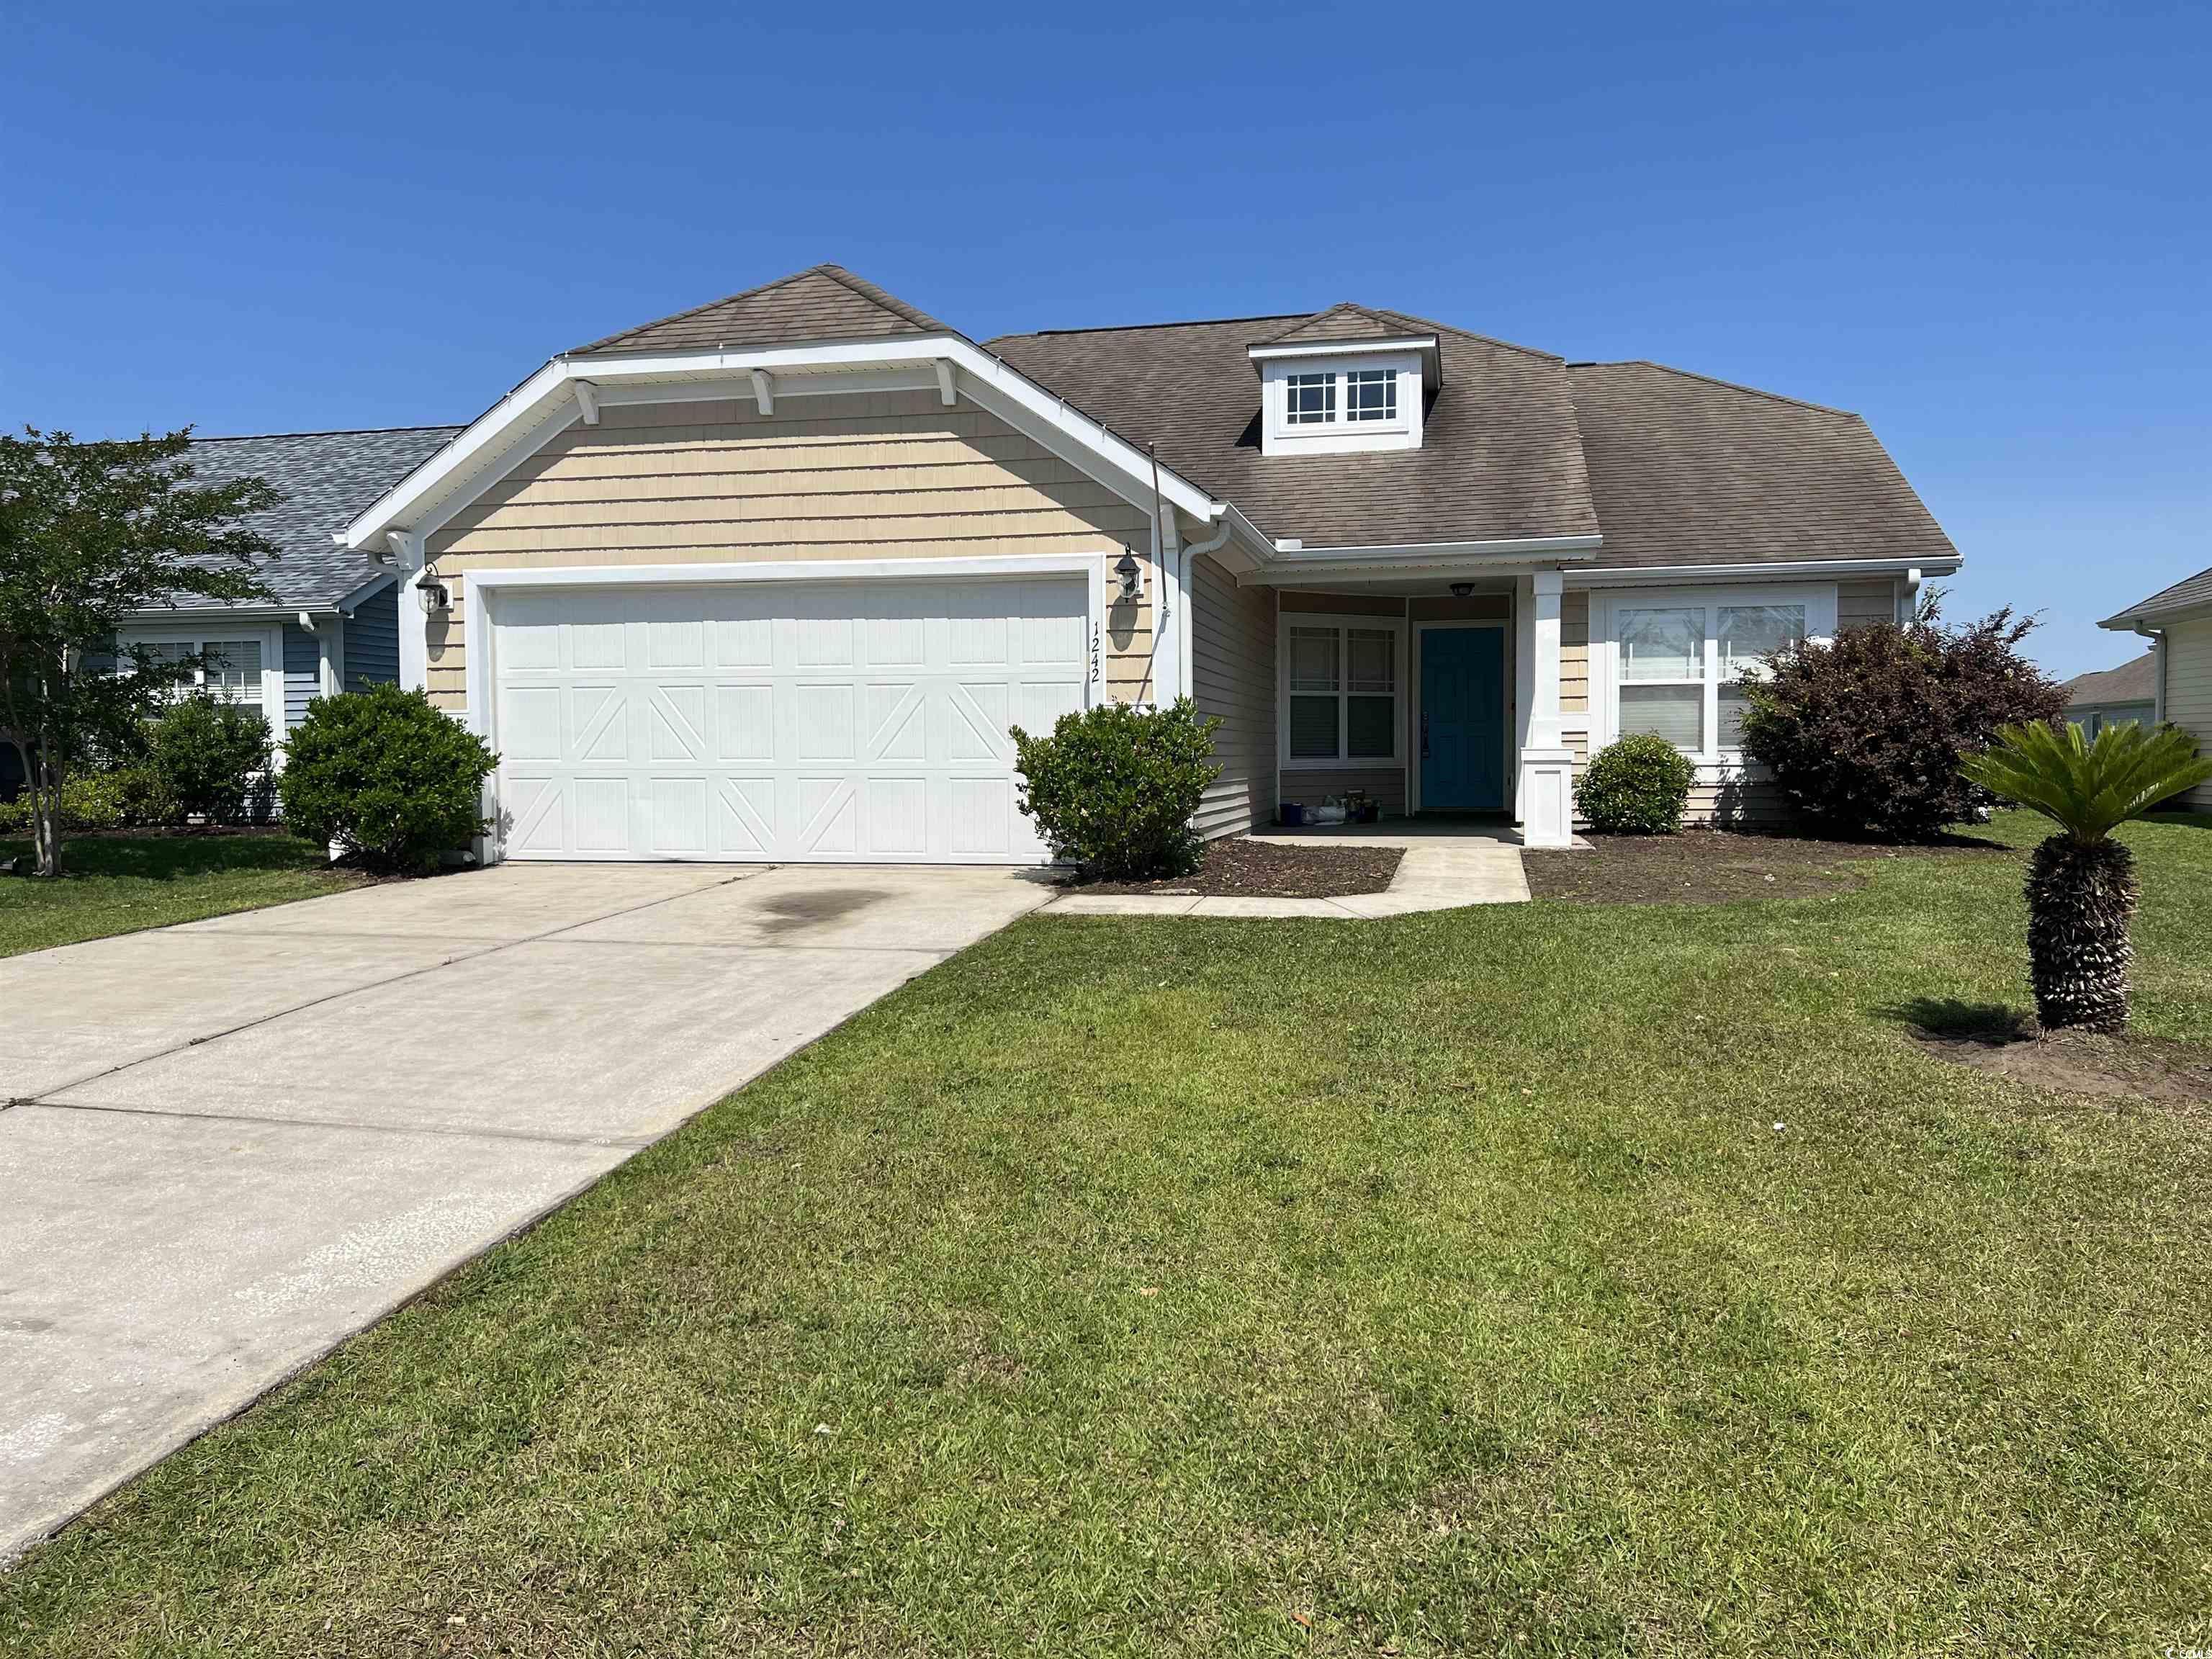 very beautiful  3 bedroom 2 bath home in cameron village has a community pool. great location very easy access to 31 and near murrells inlet with great restaurants and the great marshwalk.